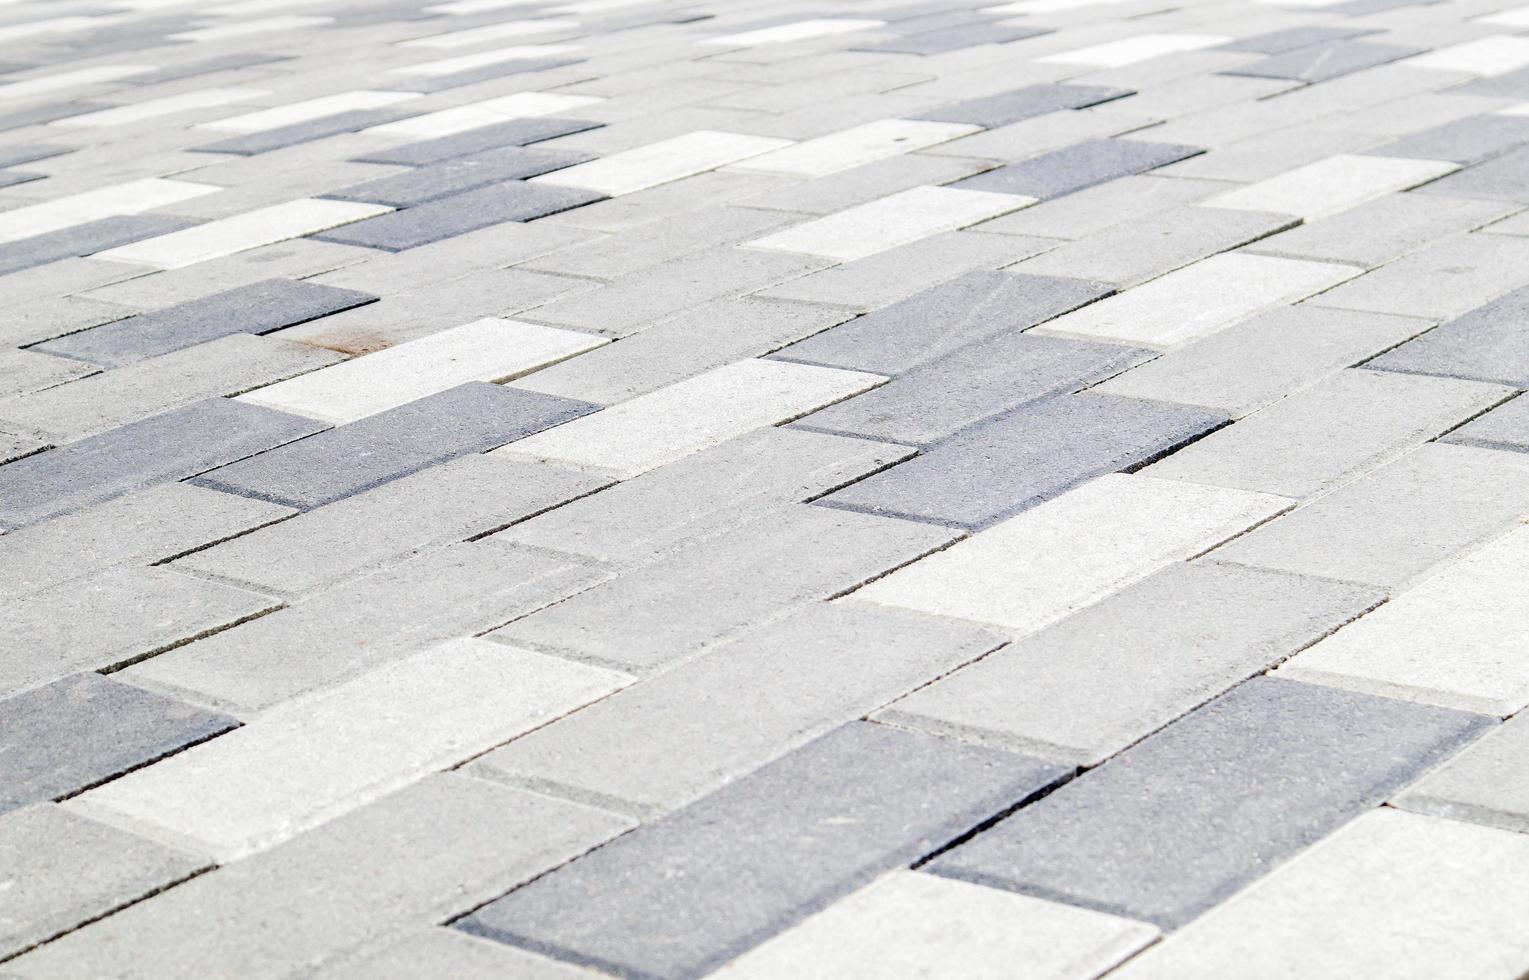 Concrete or paved newly laid gray paving slabs or stones for floors photo